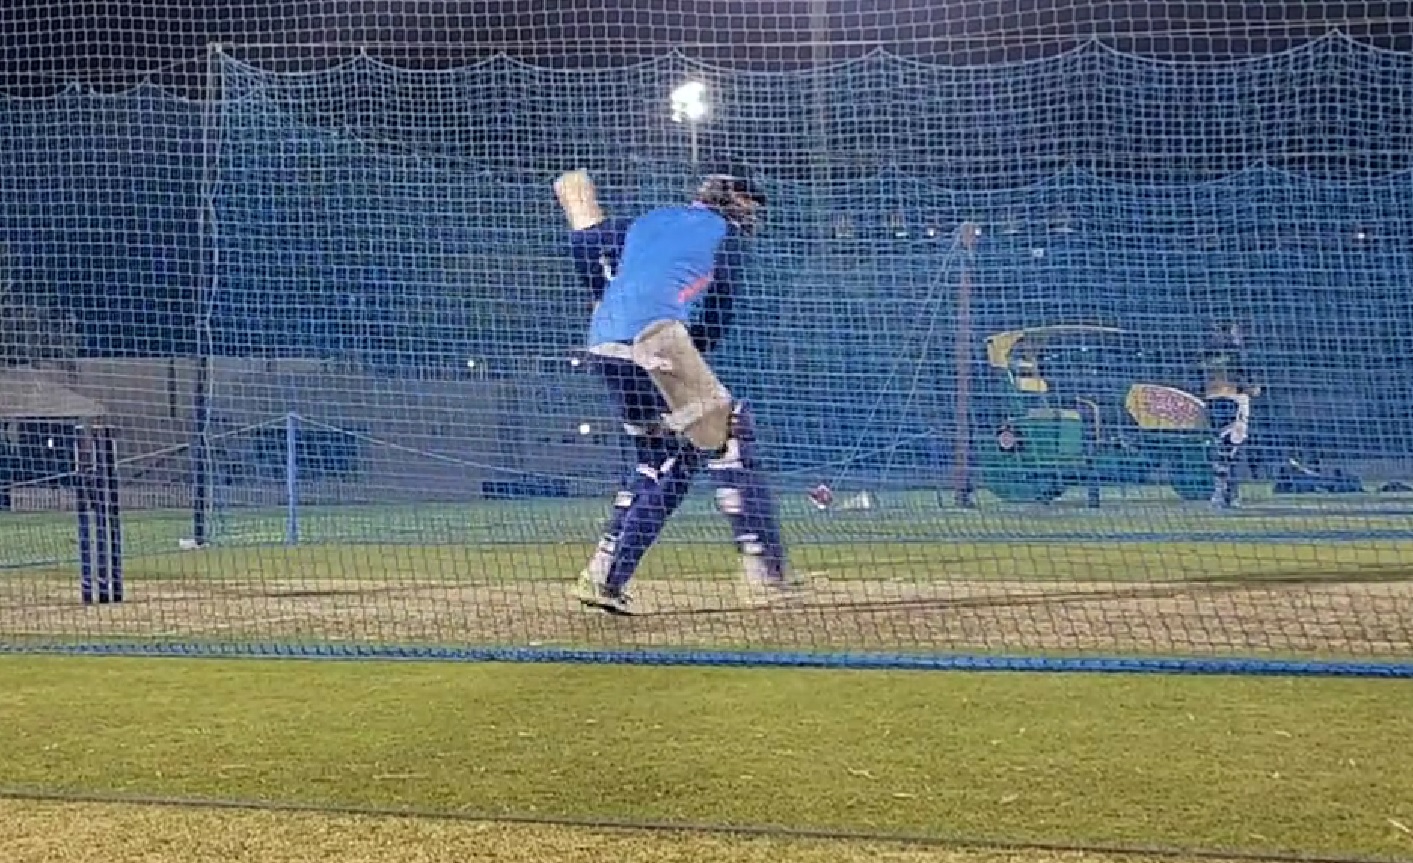 India Asia Cup practice: Watch Rishabh Pant & Ravindra Jadeja hit GIANT sixes in India practice, Check OUT, India vs Pakistan LIVE, Asia Cup 2022 LIVE